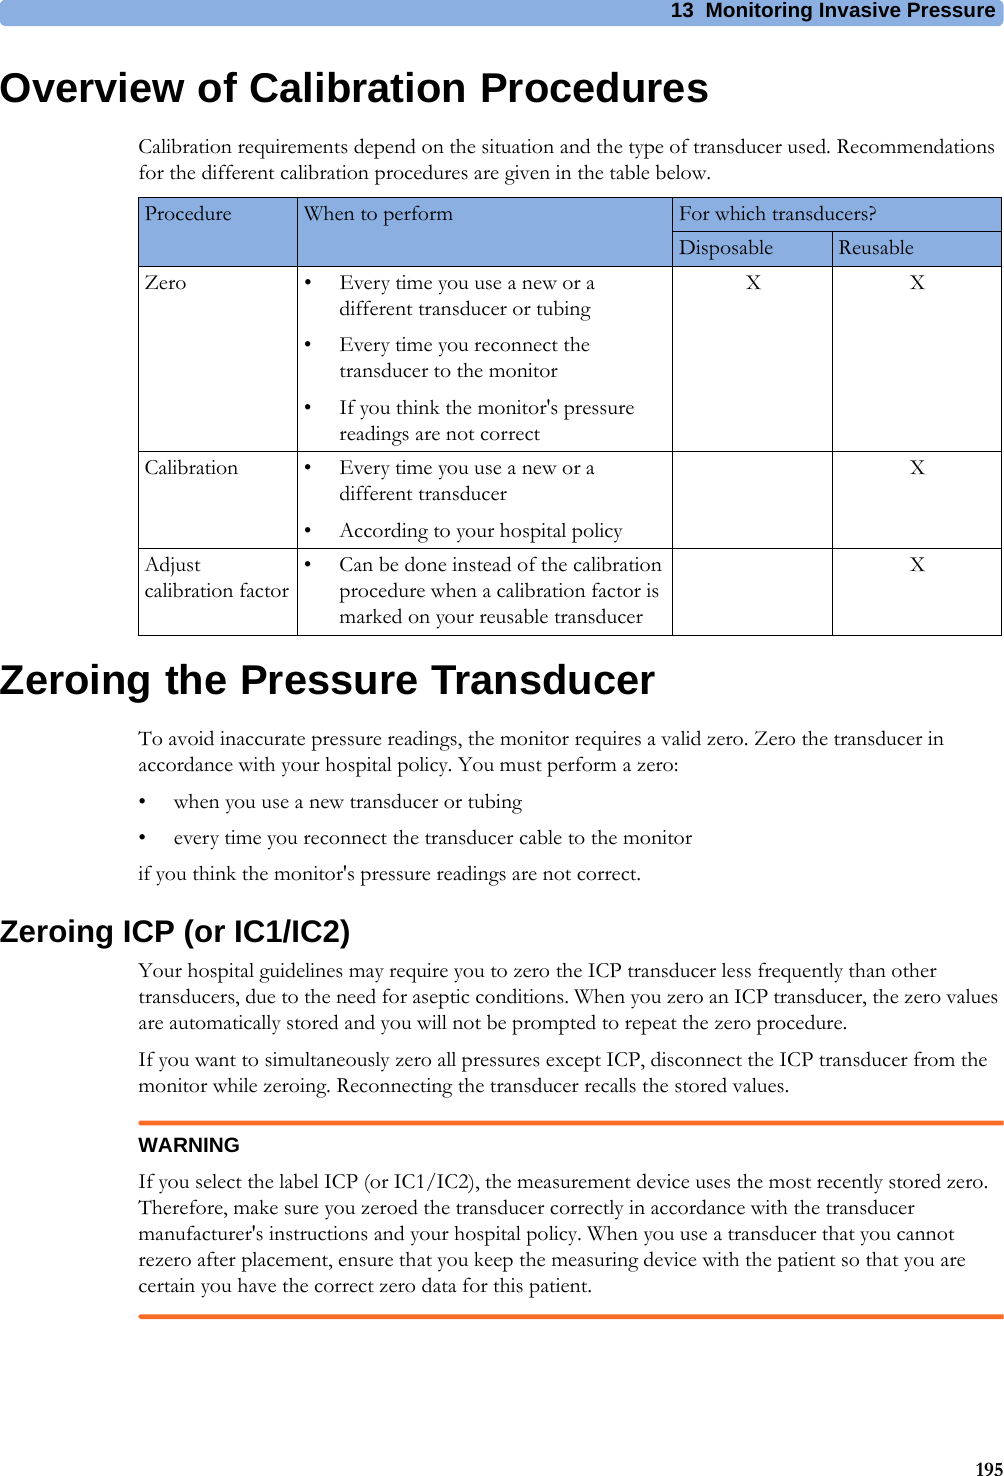 13 Monitoring Invasive Pressure195Overview of Calibration ProceduresCalibration requirements depend on the situation and the type of transducer used. Recommendations for the different calibration procedures are given in the table below.Zeroing the Pressure TransducerTo avoid inaccurate pressure readings, the monitor requires a valid zero. Zero the transducer in accordance with your hospital policy. You must perform a zero:• when you use a new transducer or tubing• every time you reconnect the transducer cable to the monitorif you think the monitor&apos;s pressure readings are not correct.Zeroing ICP (or IC1/IC2)Your hospital guidelines may require you to zero the ICP transducer less frequently than other transducers, due to the need for aseptic conditions. When you zero an ICP transducer, the zero values are automatically stored and you will not be prompted to repeat the zero procedure.If you want to simultaneously zero all pressures except ICP, disconnect the ICP transducer from the monitor while zeroing. Reconnecting the transducer recalls the stored values.WARNINGIf you select the label ICP (or IC1/IC2), the measurement device uses the most recently stored zero. Therefore, make sure you zeroed the transducer correctly in accordance with the transducer manufacturer&apos;s instructions and your hospital policy. When you use a transducer that you cannot rezero after placement, ensure that you keep the measuring device with the patient so that you are certain you have the correct zero data for this patient.Procedure When to perform For which transducers?Disposable ReusableZero • Every time you use a new or a different transducer or tubing• Every time you reconnect the transducer to the monitor• If you think the monitor&apos;s pressure readings are not correctXXCalibration • Every time you use a new or a different transducer• According to your hospital policyXAdjust calibration factor• Can be done instead of the calibration procedure when a calibration factor is marked on your reusable transducerX